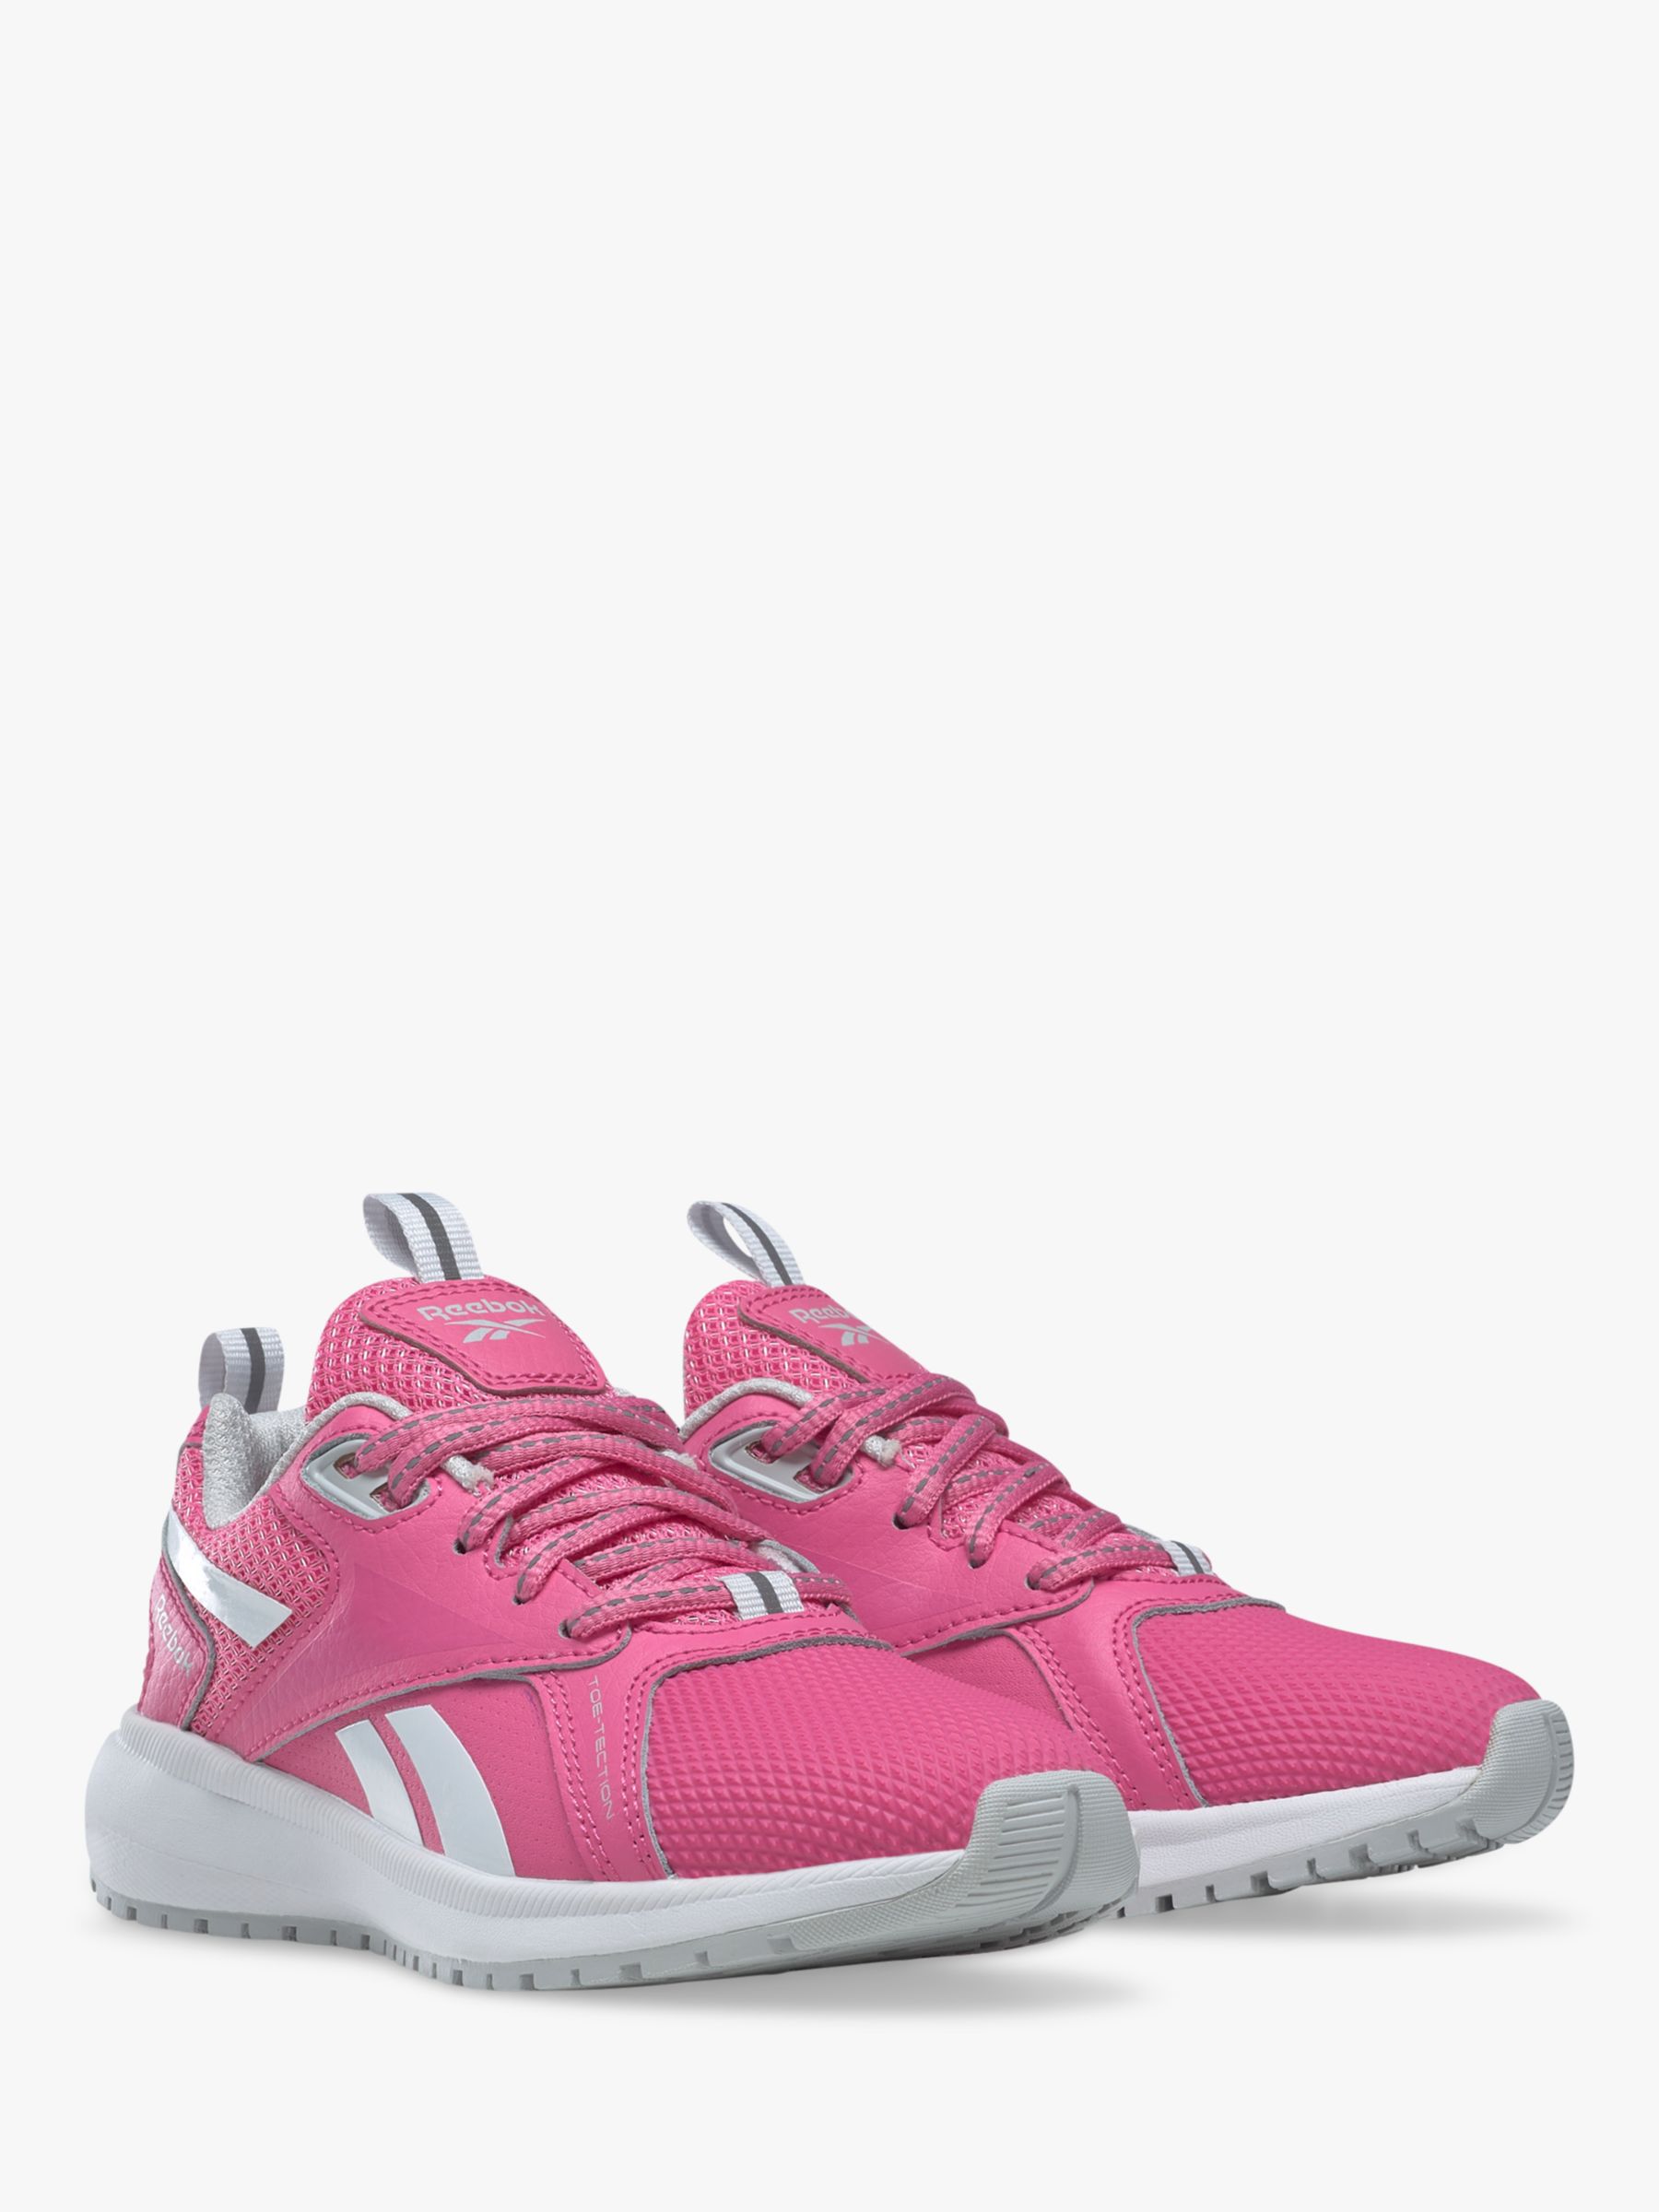 Reebok Kids\' Durable XT Trainers, True Pink/Pure Grey 2/Ftwr White at John  Lewis & Partners